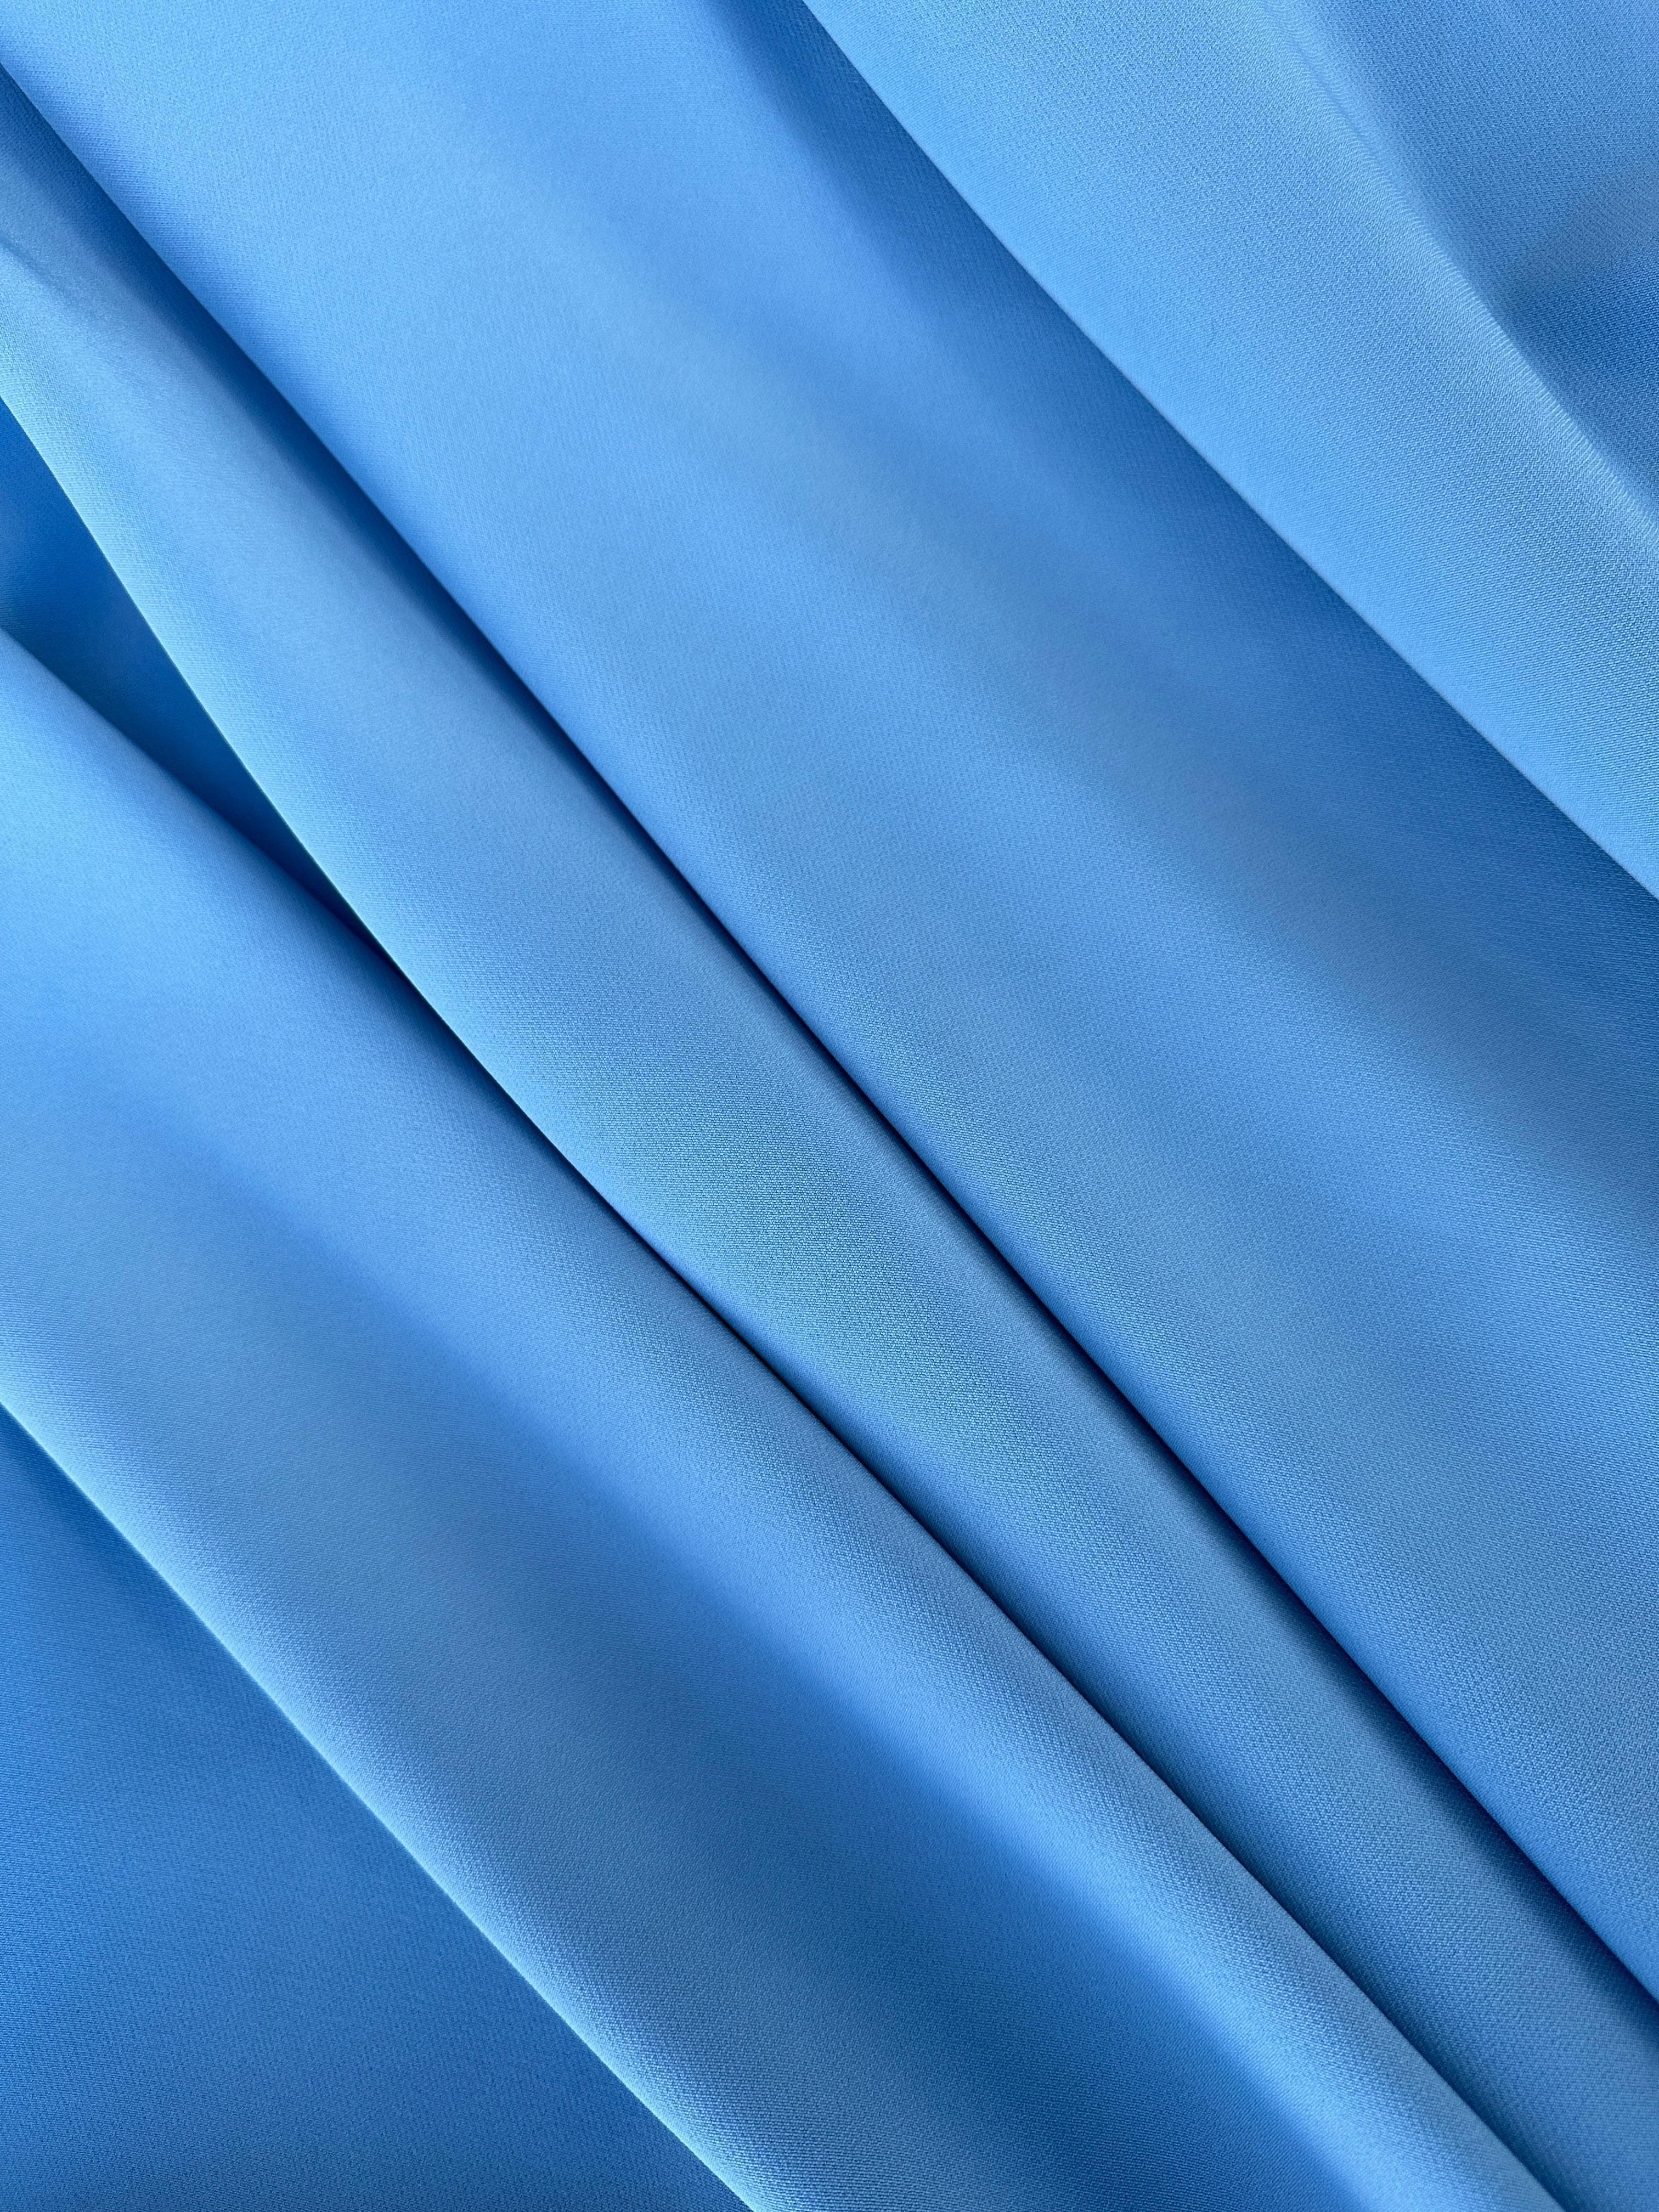 baby blue stretch crepe, Aqua Blue Stretch Crepe, blue stretch crepe, light blue stretch crepe, stretch crepe for woman, stretch crepe for bride,  crepe on discount, crepe in low price, crepe on sale, premium crepe, solid crepe, crepe, crepe fabric